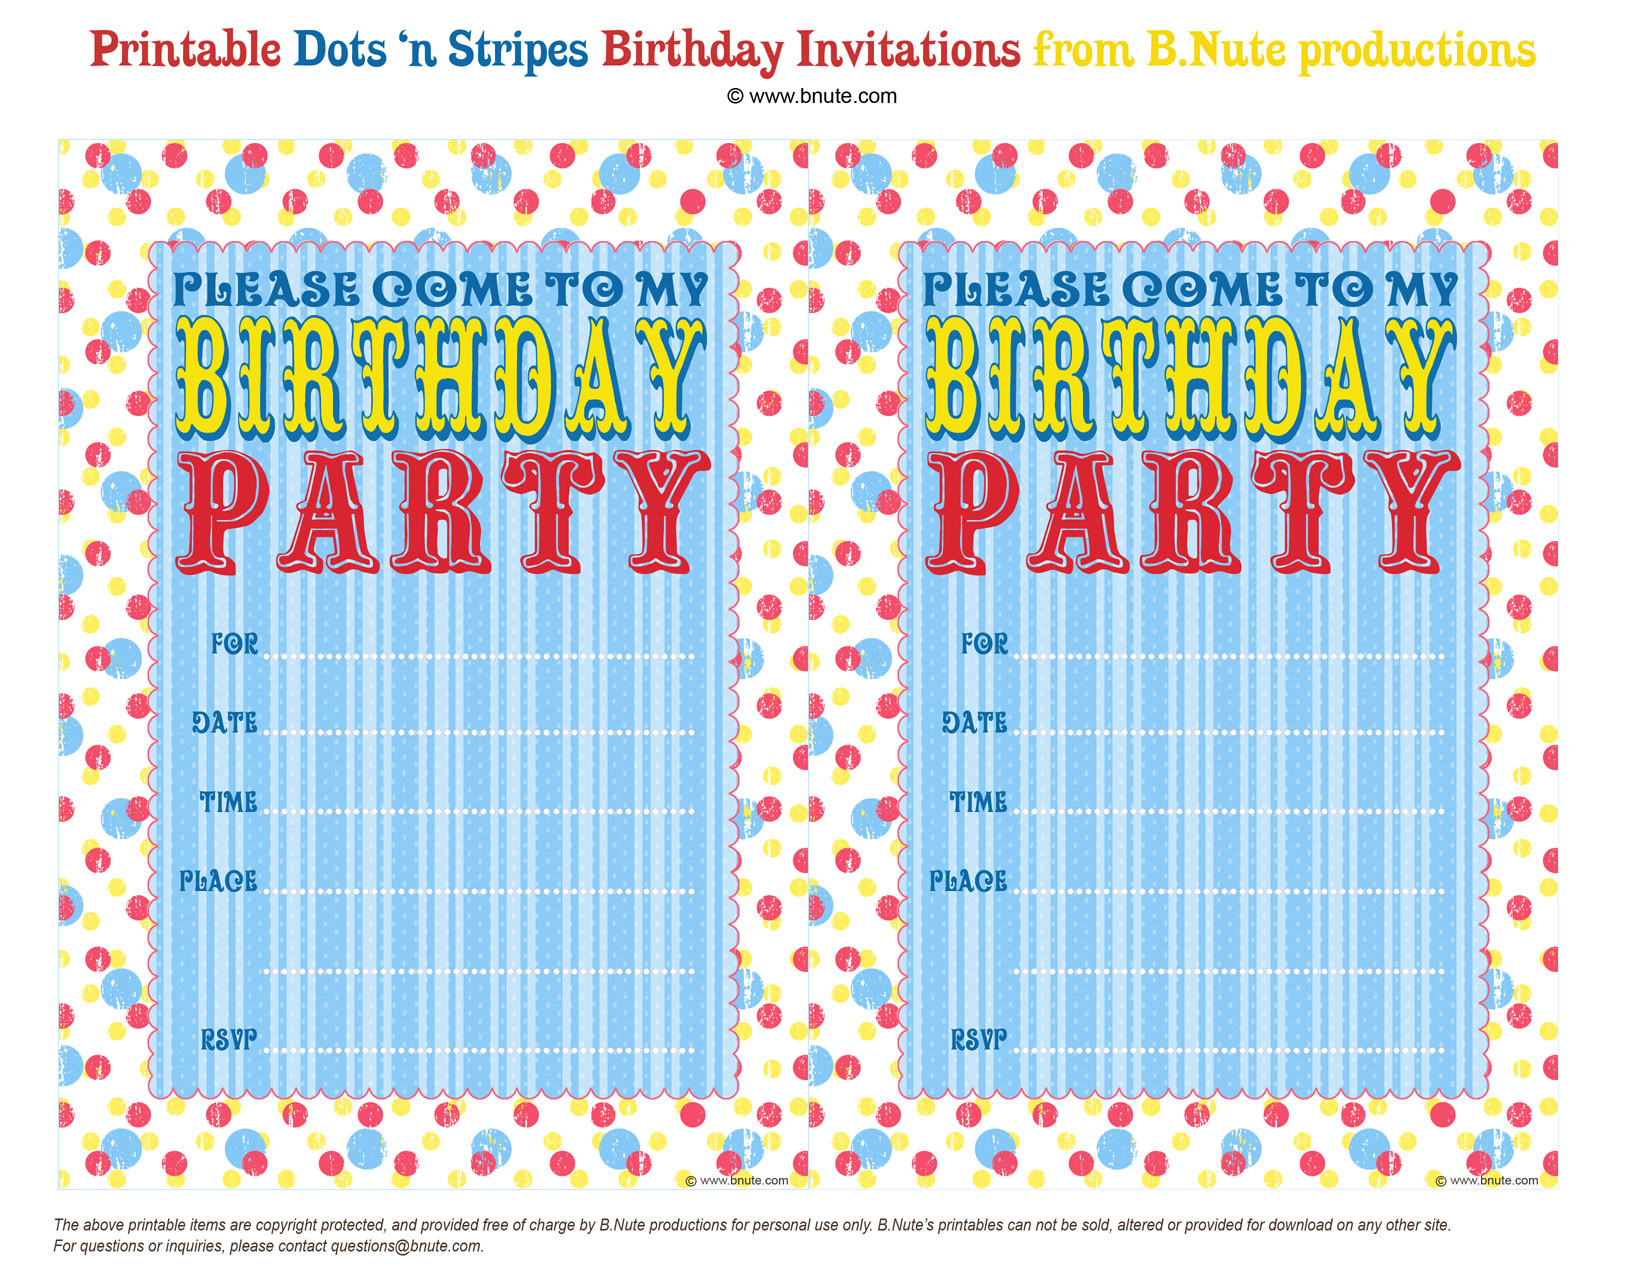 Birthday Party Invite Template
 bnute productions Free Printable Dots n Stripes Birthday